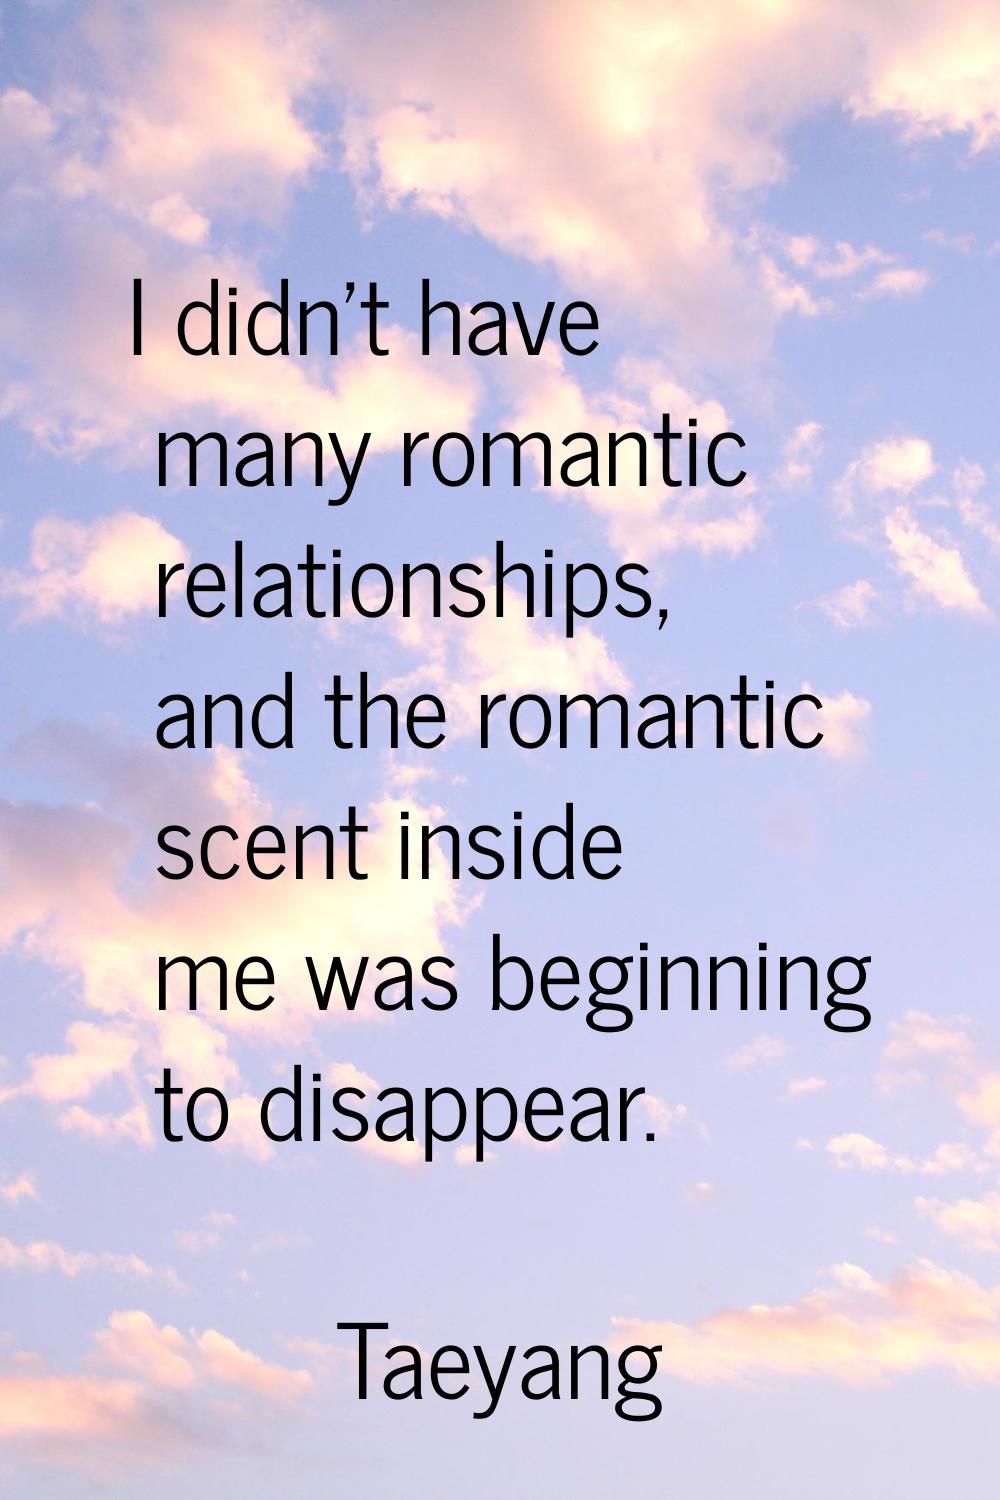 I didn't have many romantic relationships, and the romantic scent inside me was beginning to disapp